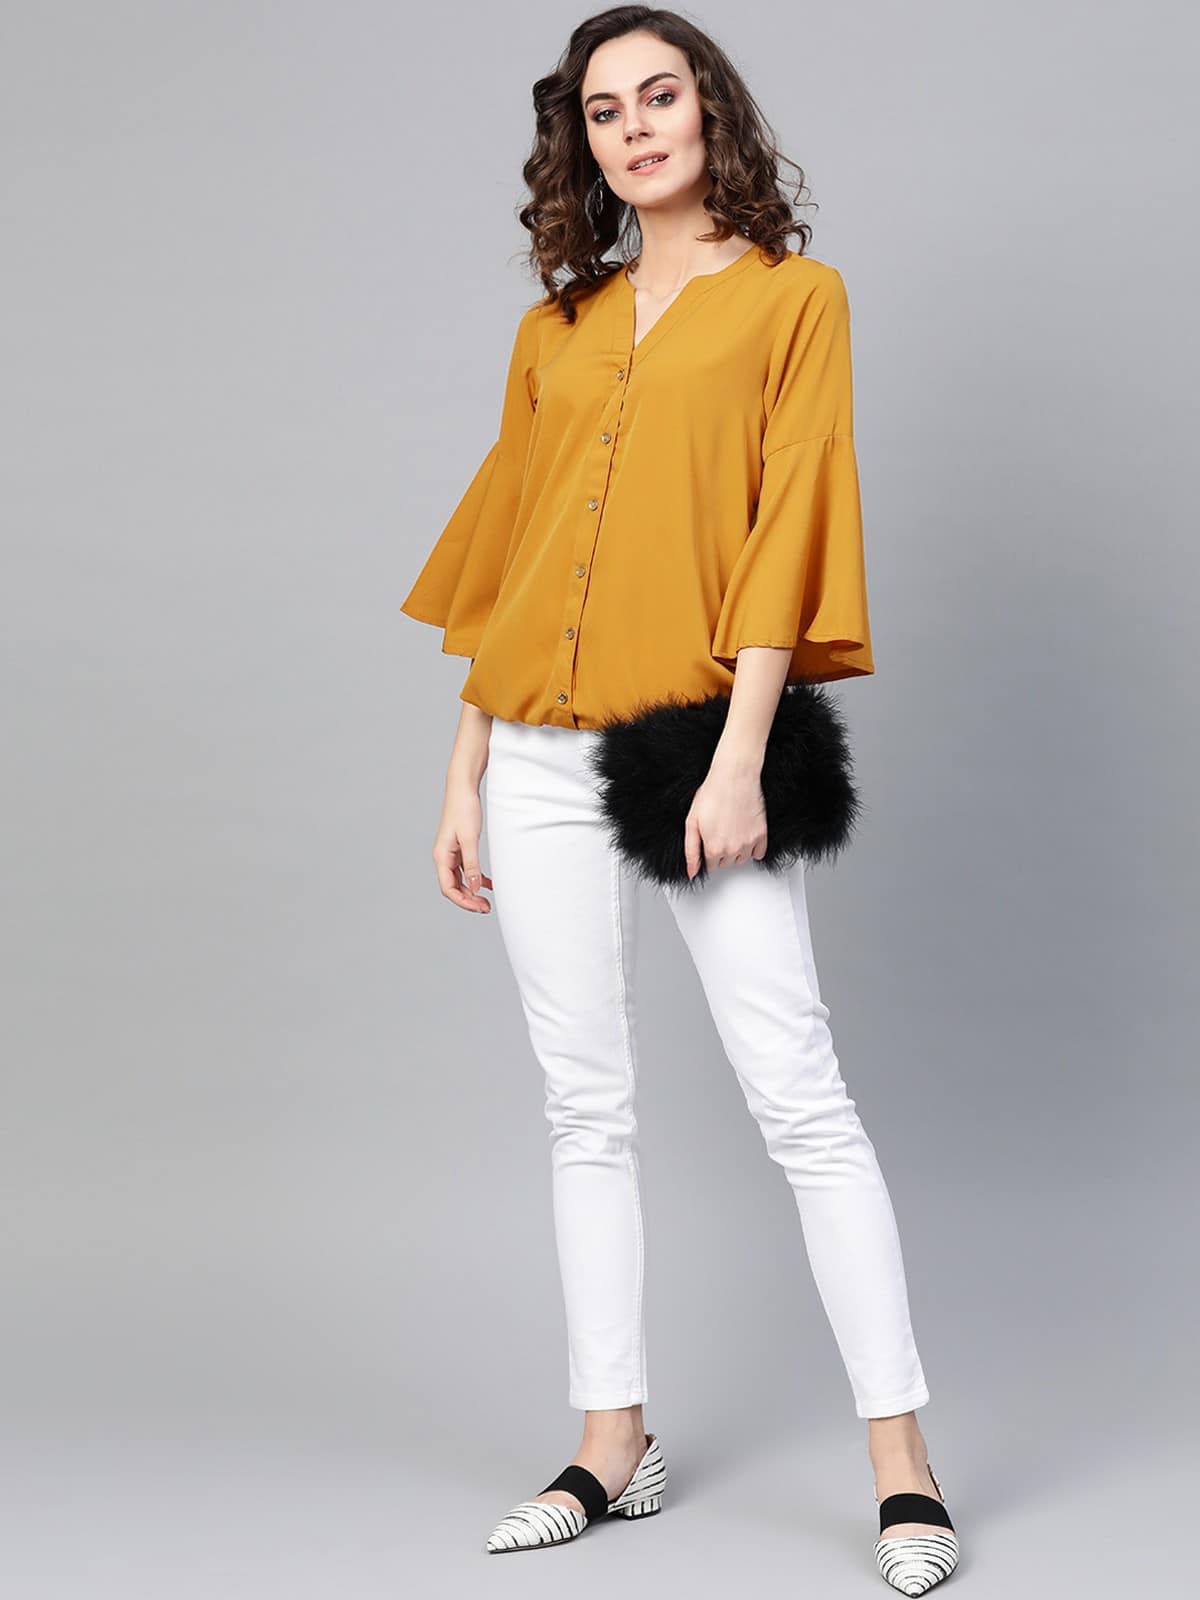 Women's Solid Shirt Balloon Top With Huge Bell Sleeves - Pannkh